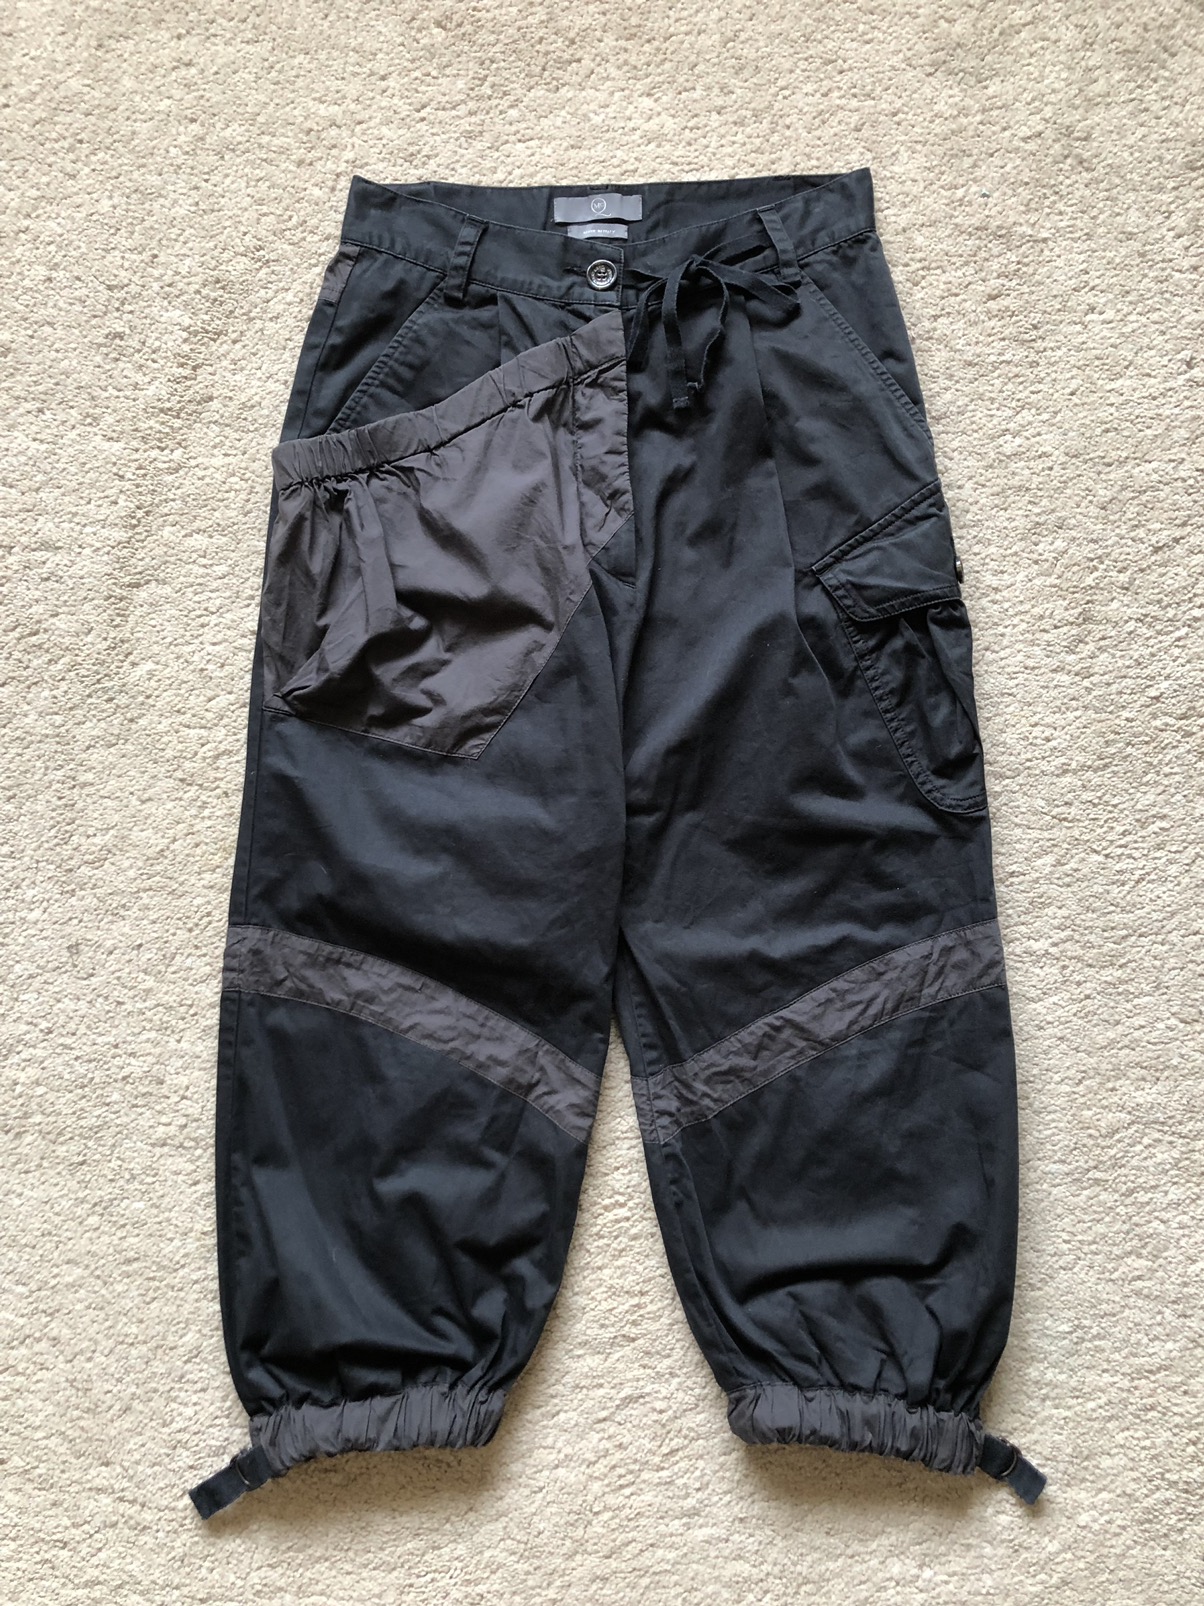 2000s Alexander Mcqueen Reconstruct Ankle Length Cargo Pant - 4